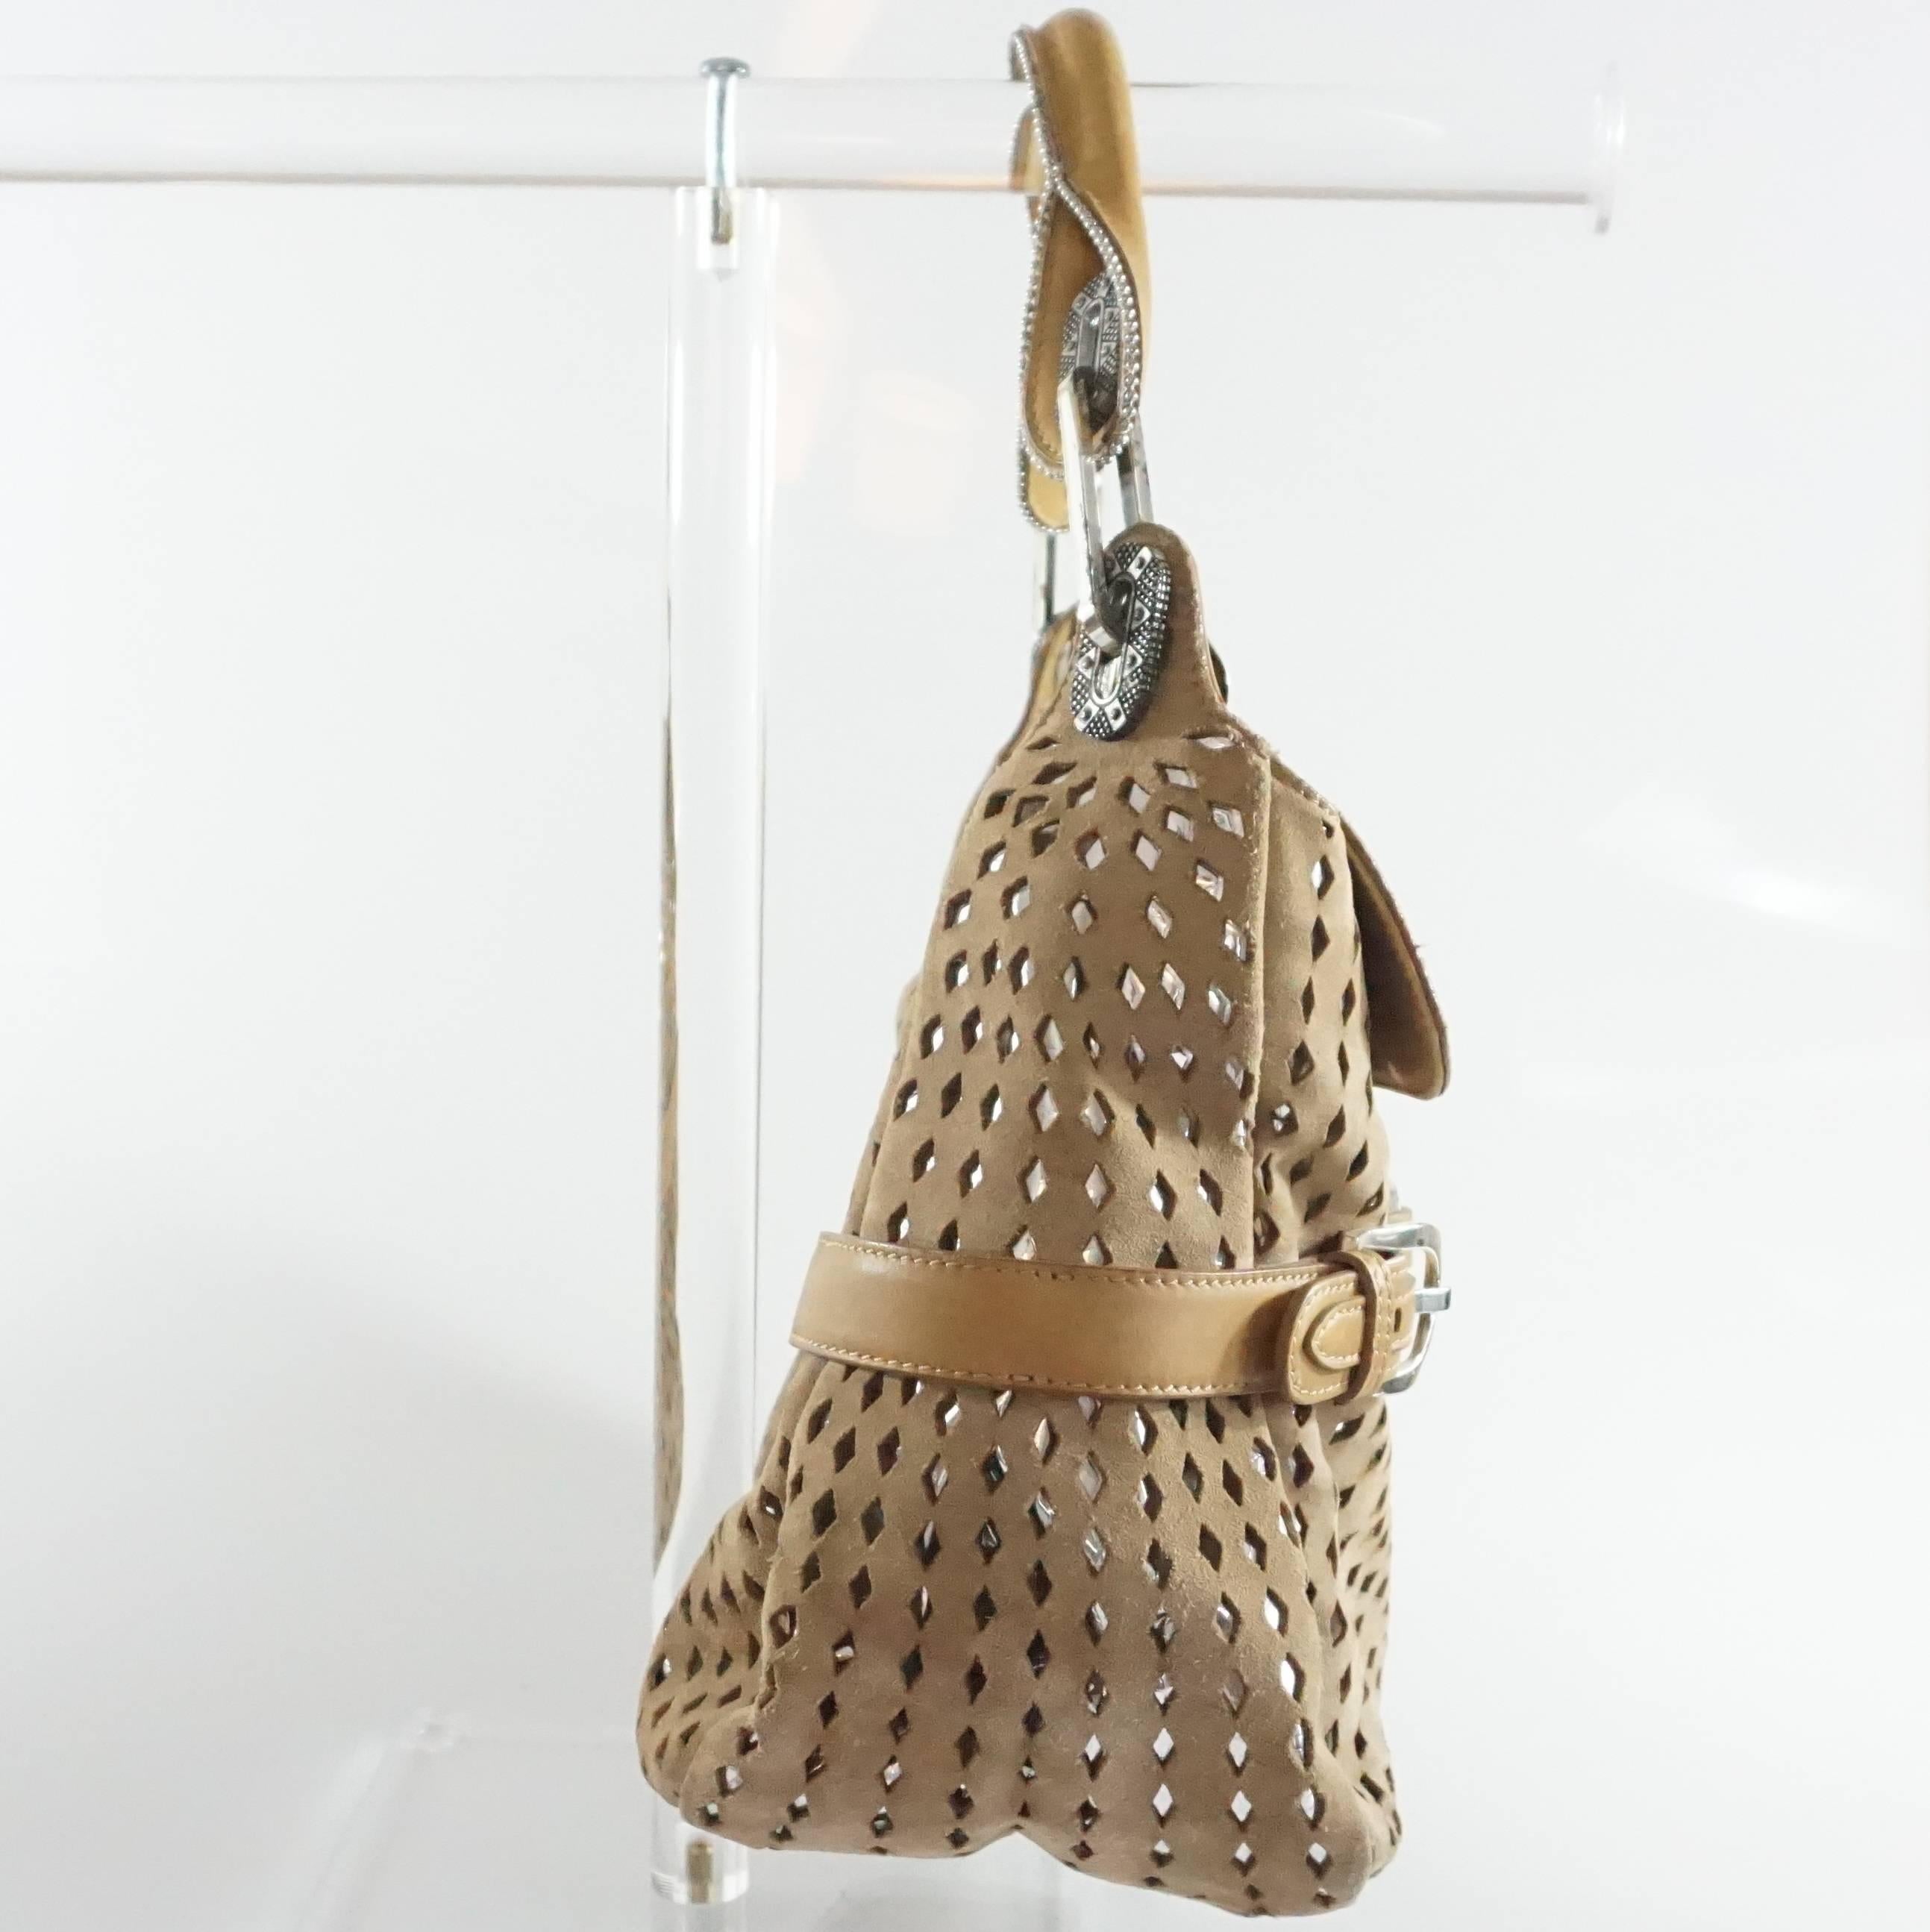 This Jimmy Choo shoulder bag has a bottom silver leather layer with a tan perforated suede layer on top. The bag has silver hardware and a leather shoulder strap. The inside lining is made of cloth and it has 1 zipper compartment and 1 open